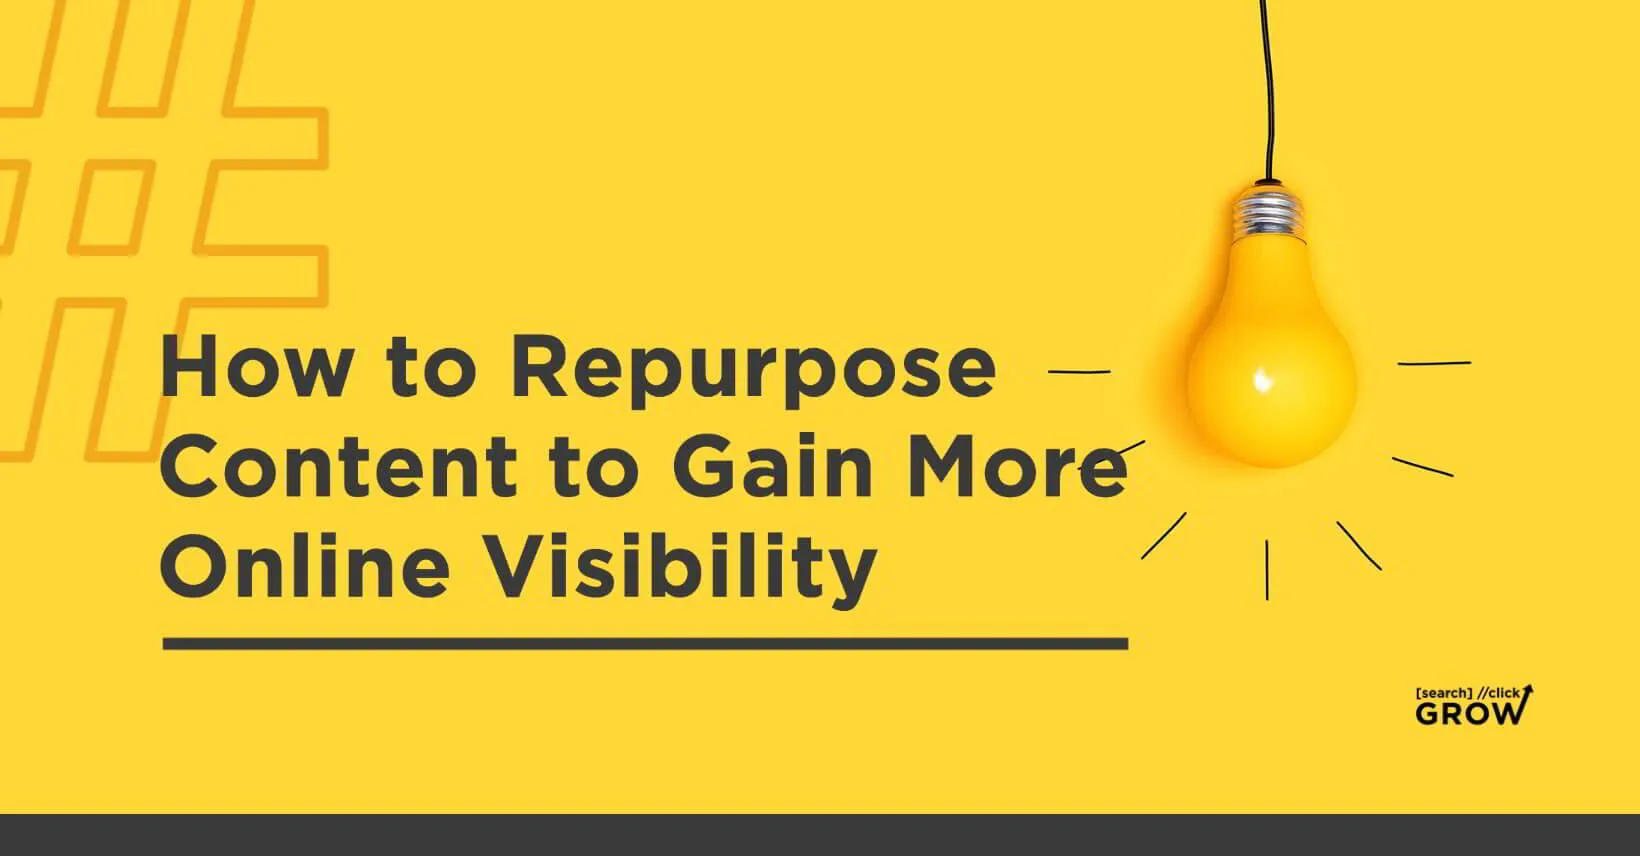 How to Repurpose Content to Gain More Online Visibility